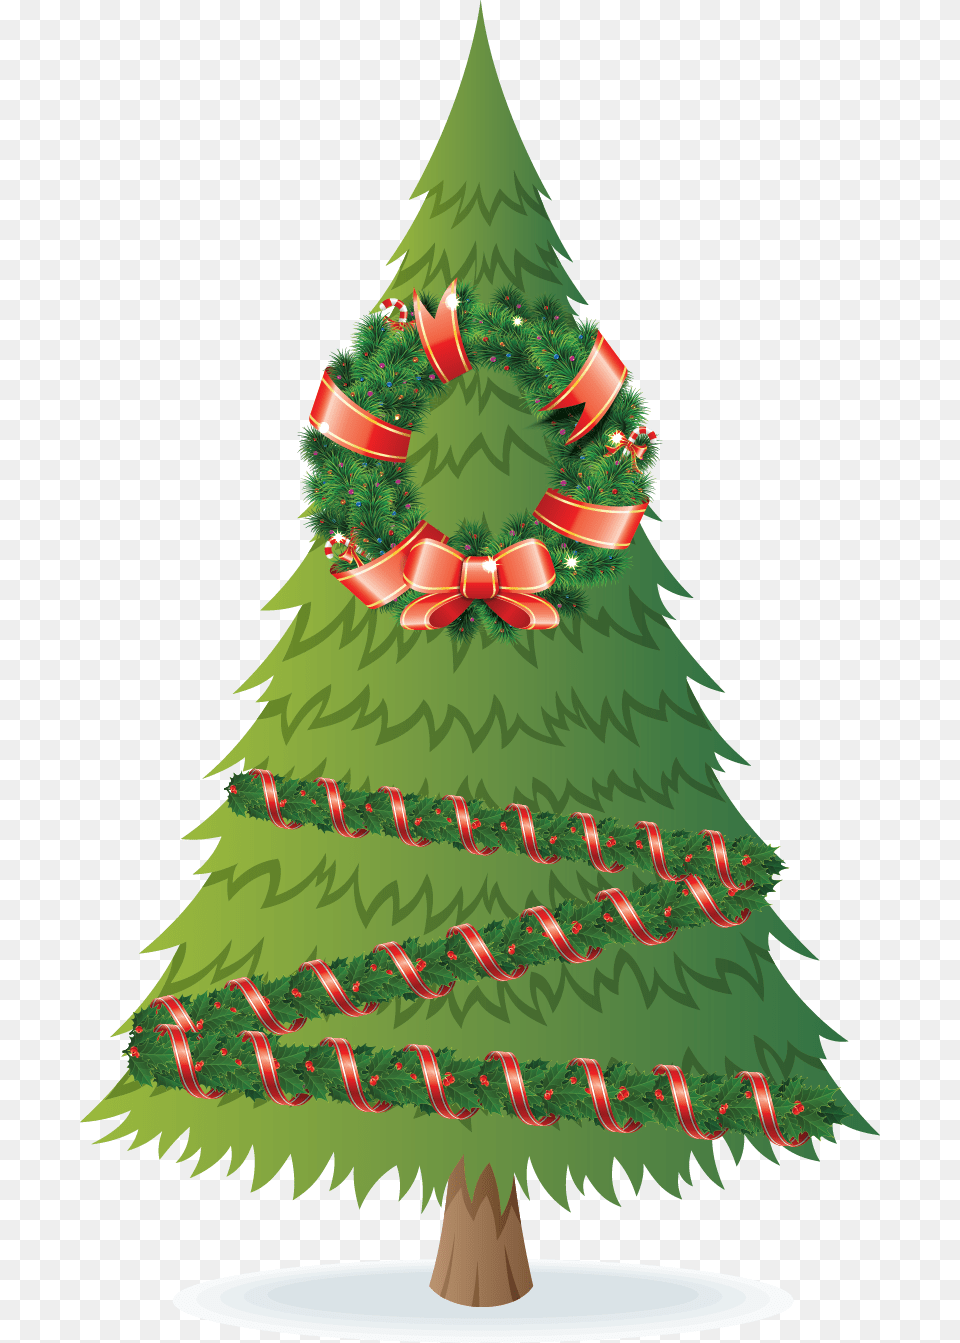 Christmas Tree With Garland And A Wreath Christmas Tree, Plant, Christmas Decorations, Festival, Christmas Tree Png Image